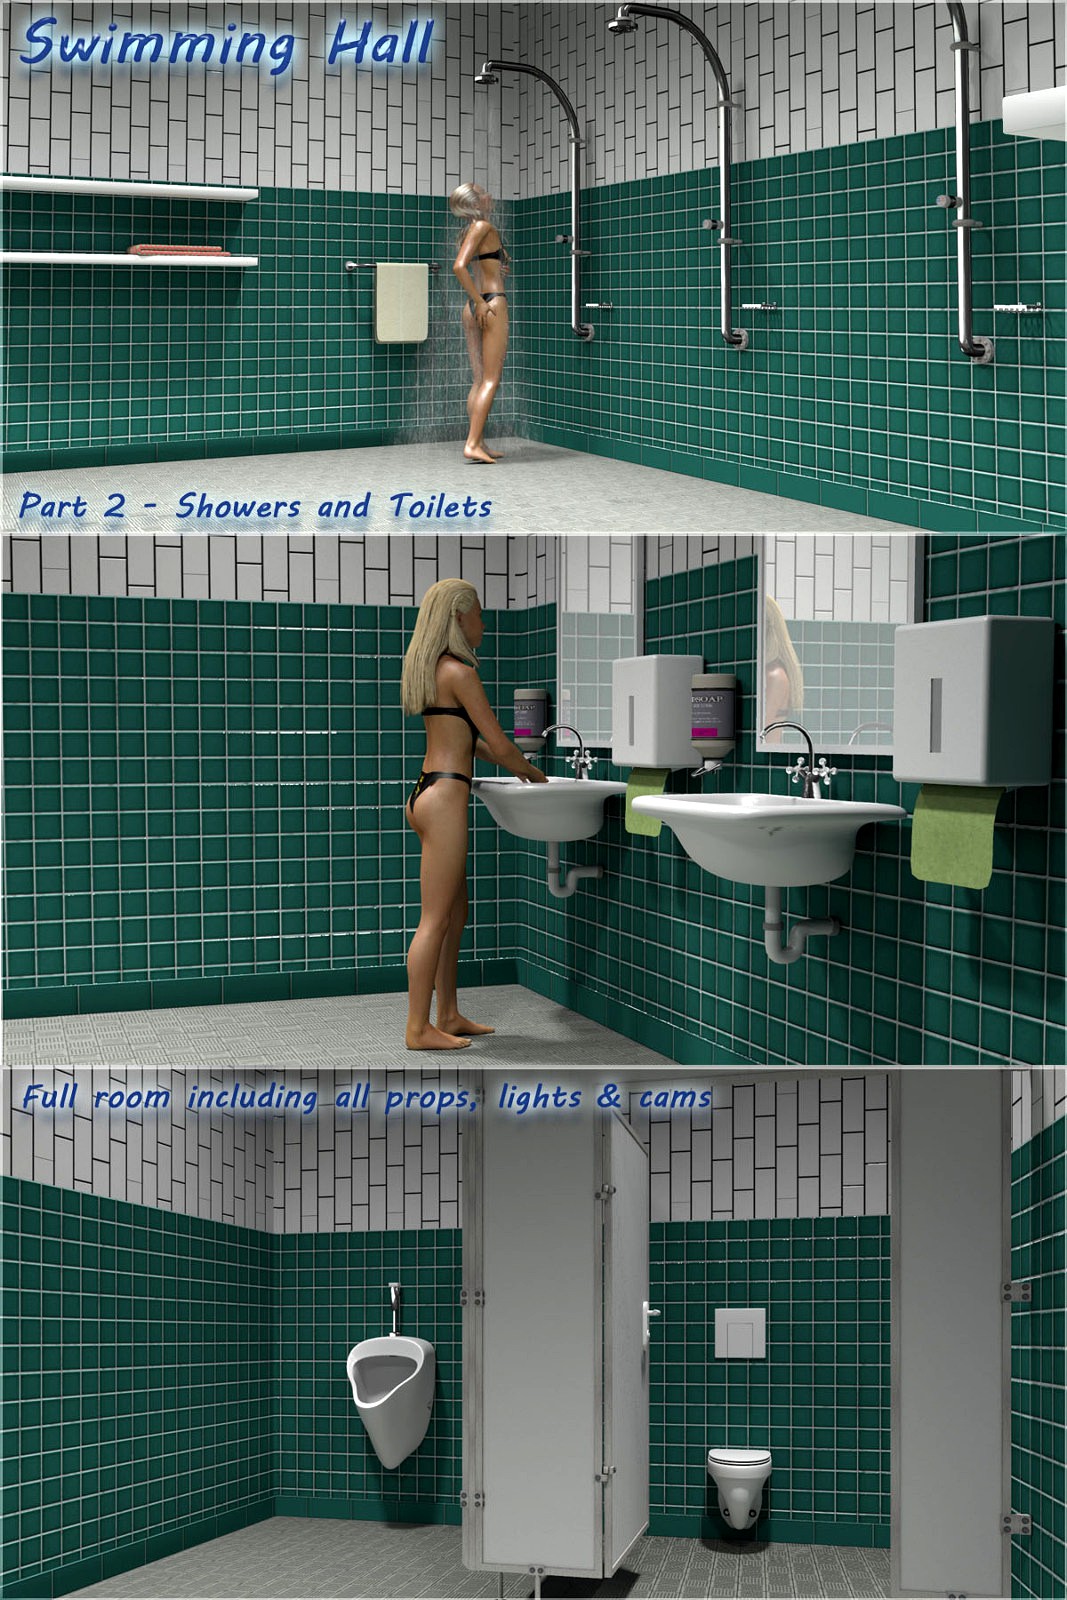 Swimming Hall Part 2 - Toilets and Showers